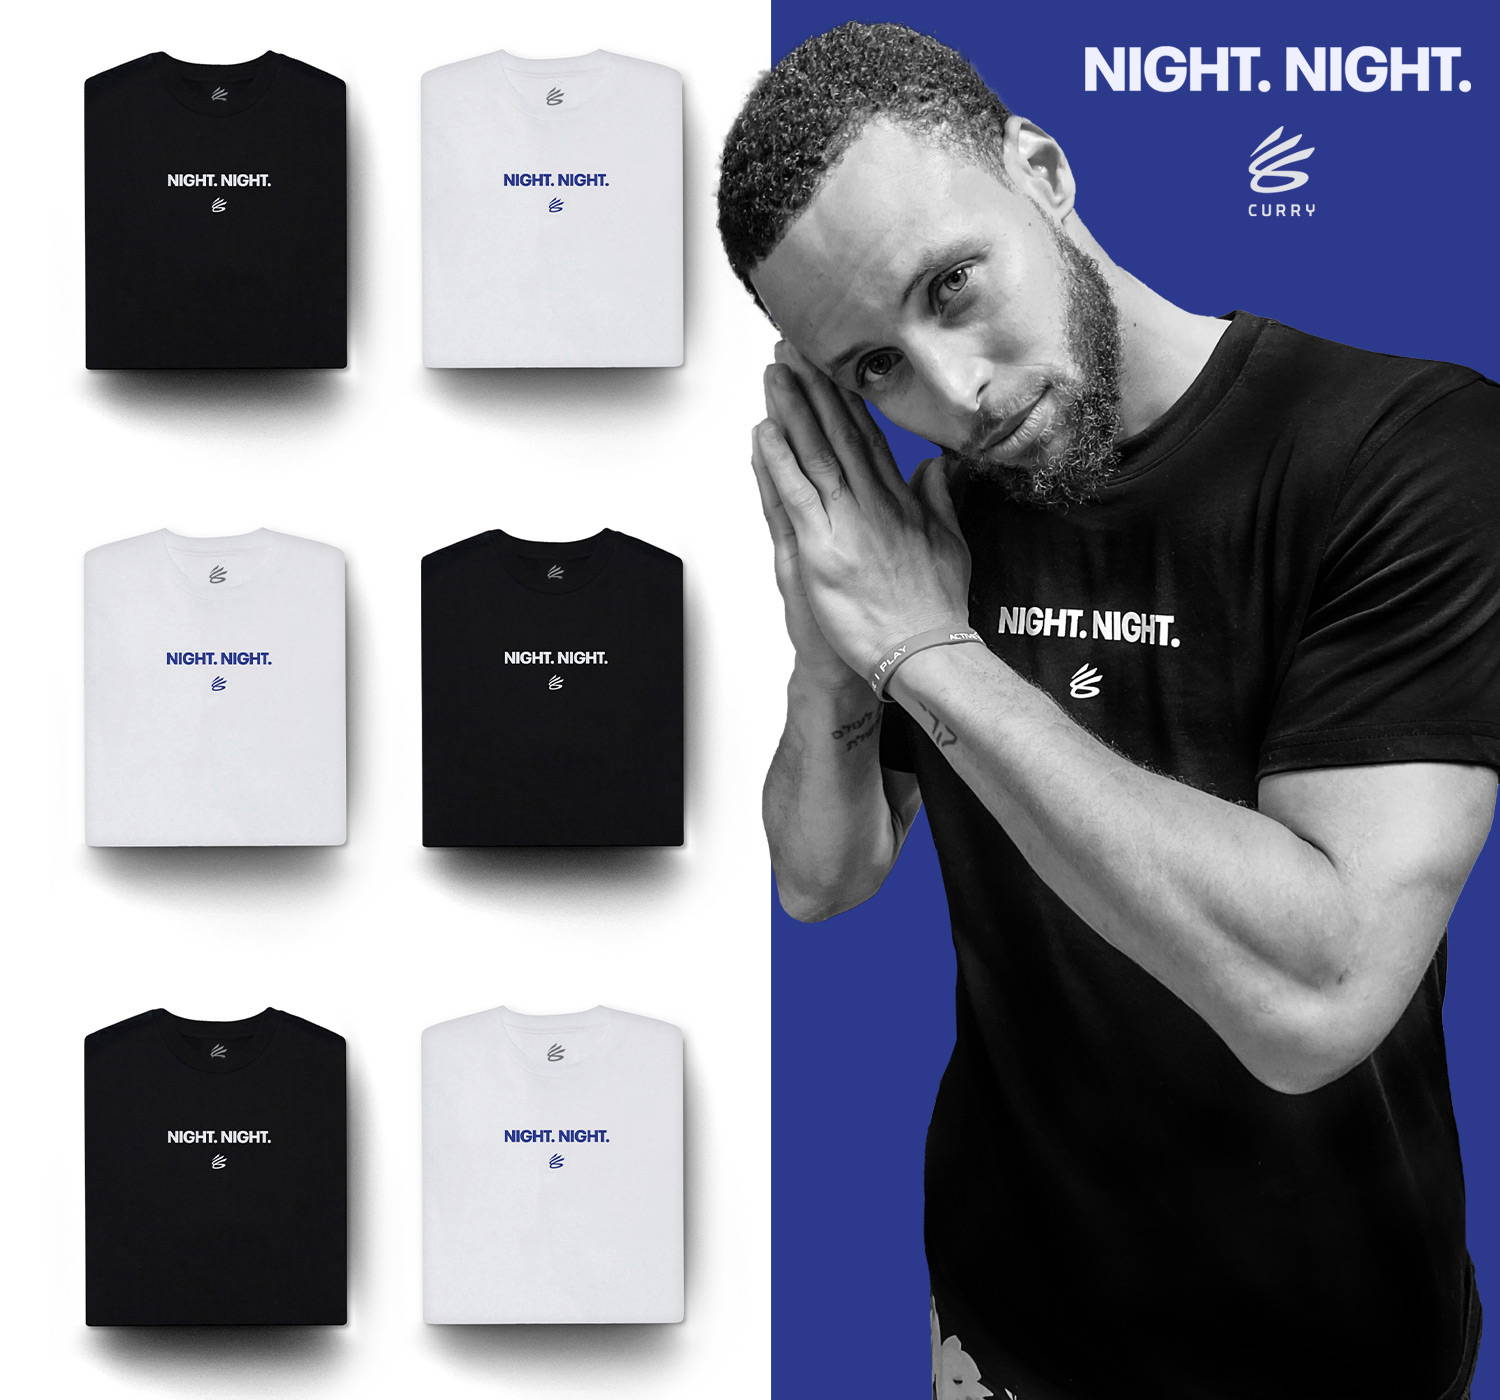 A Shoe Palace Exclusive: Stephen Curry Night. Night.